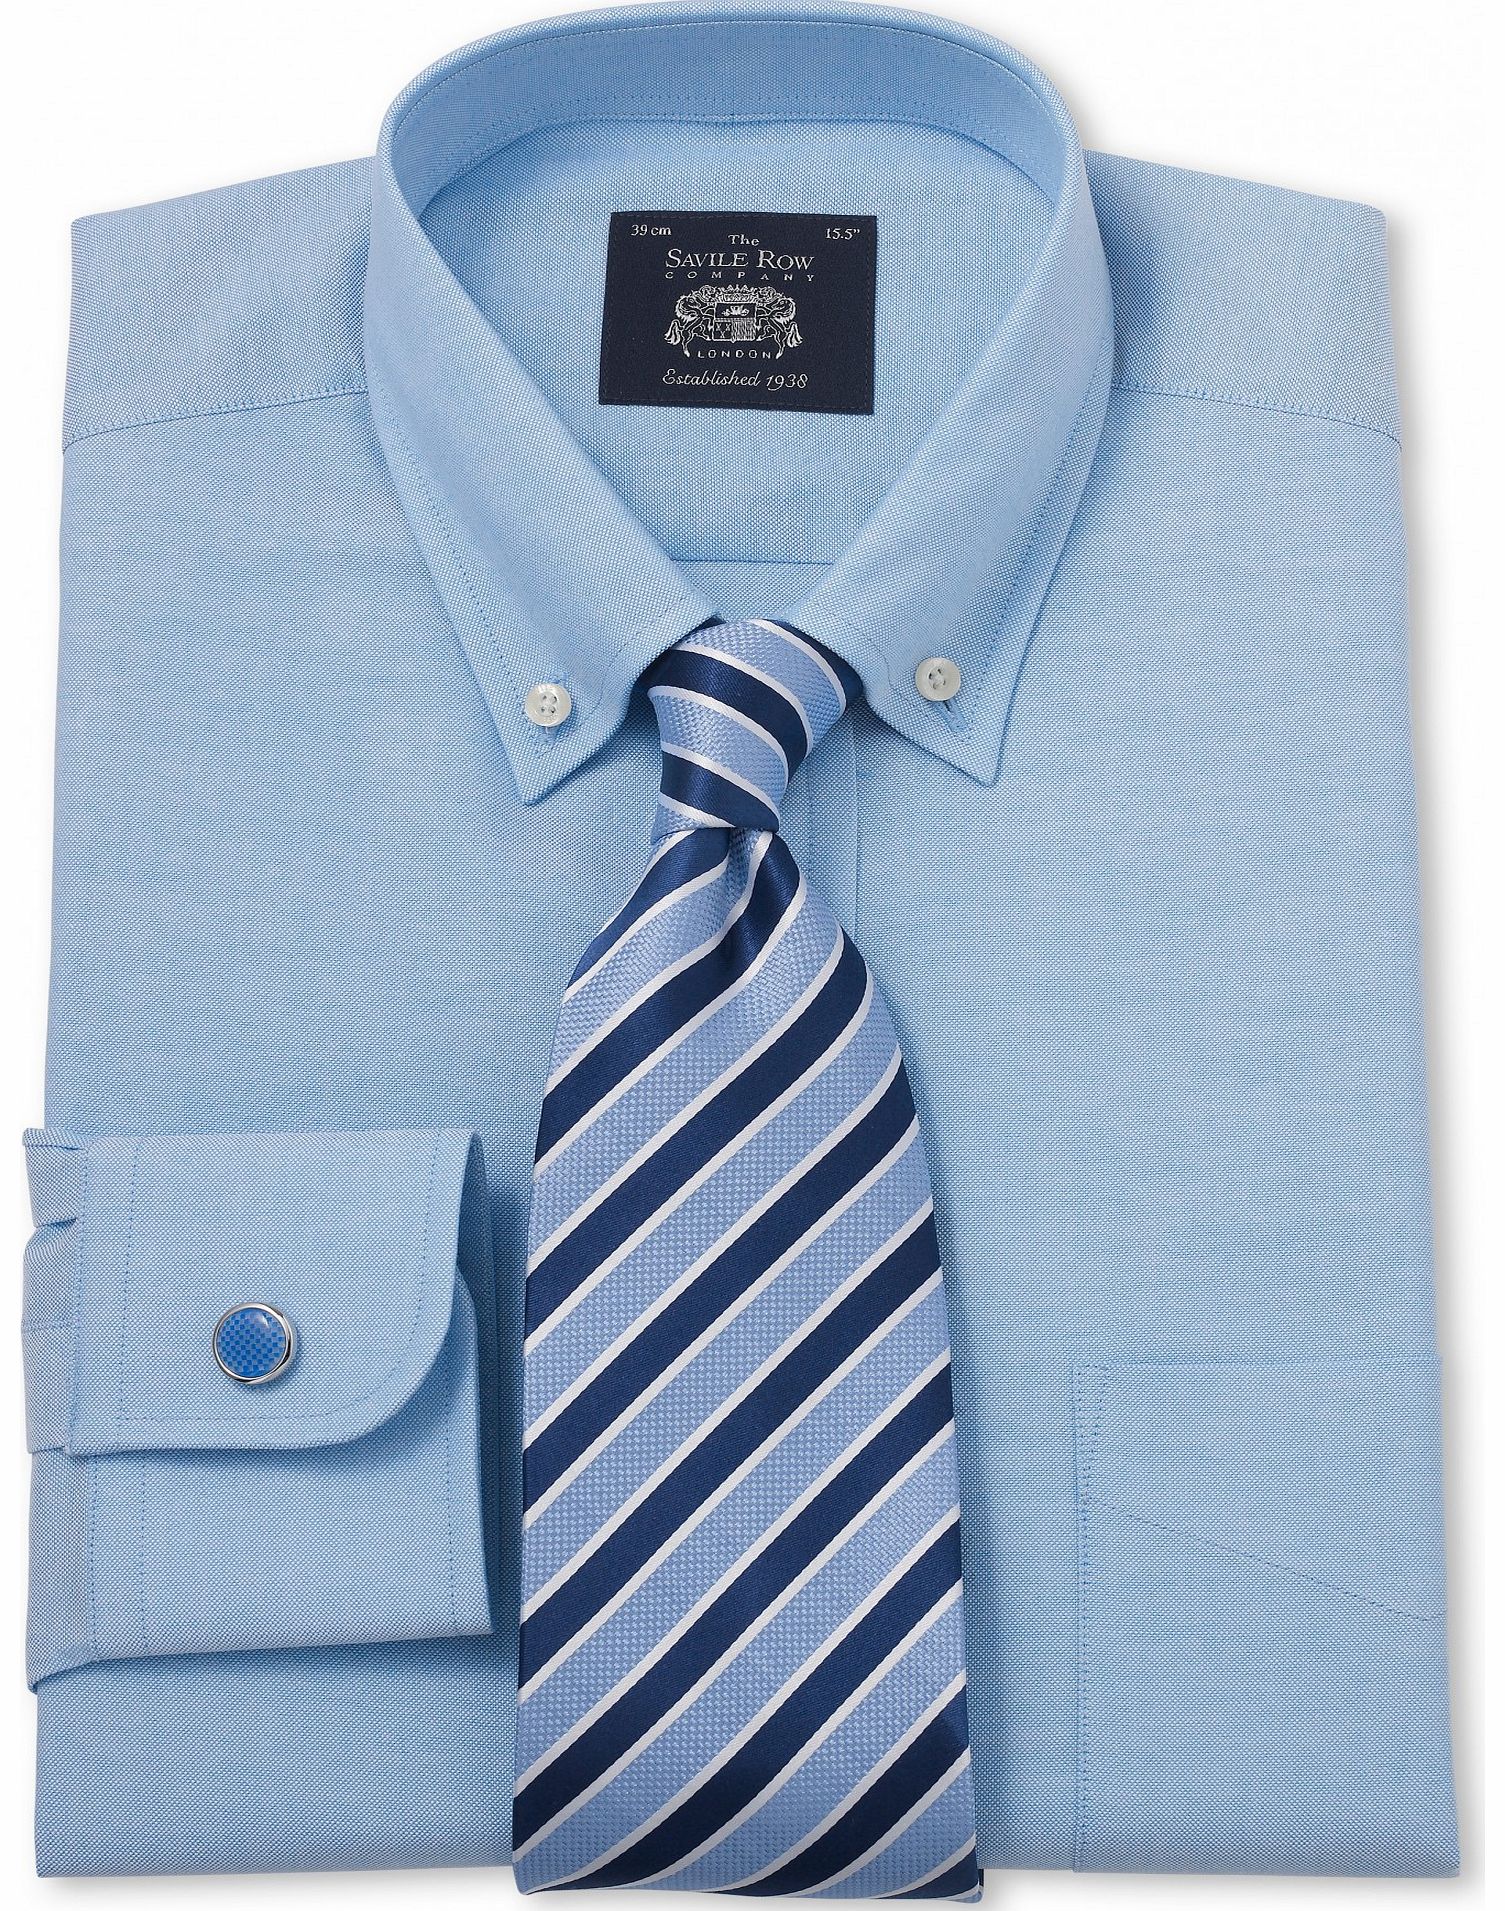 Savile Row Company Blue Pinpoint Classic Fit Shirt 19 1/2``